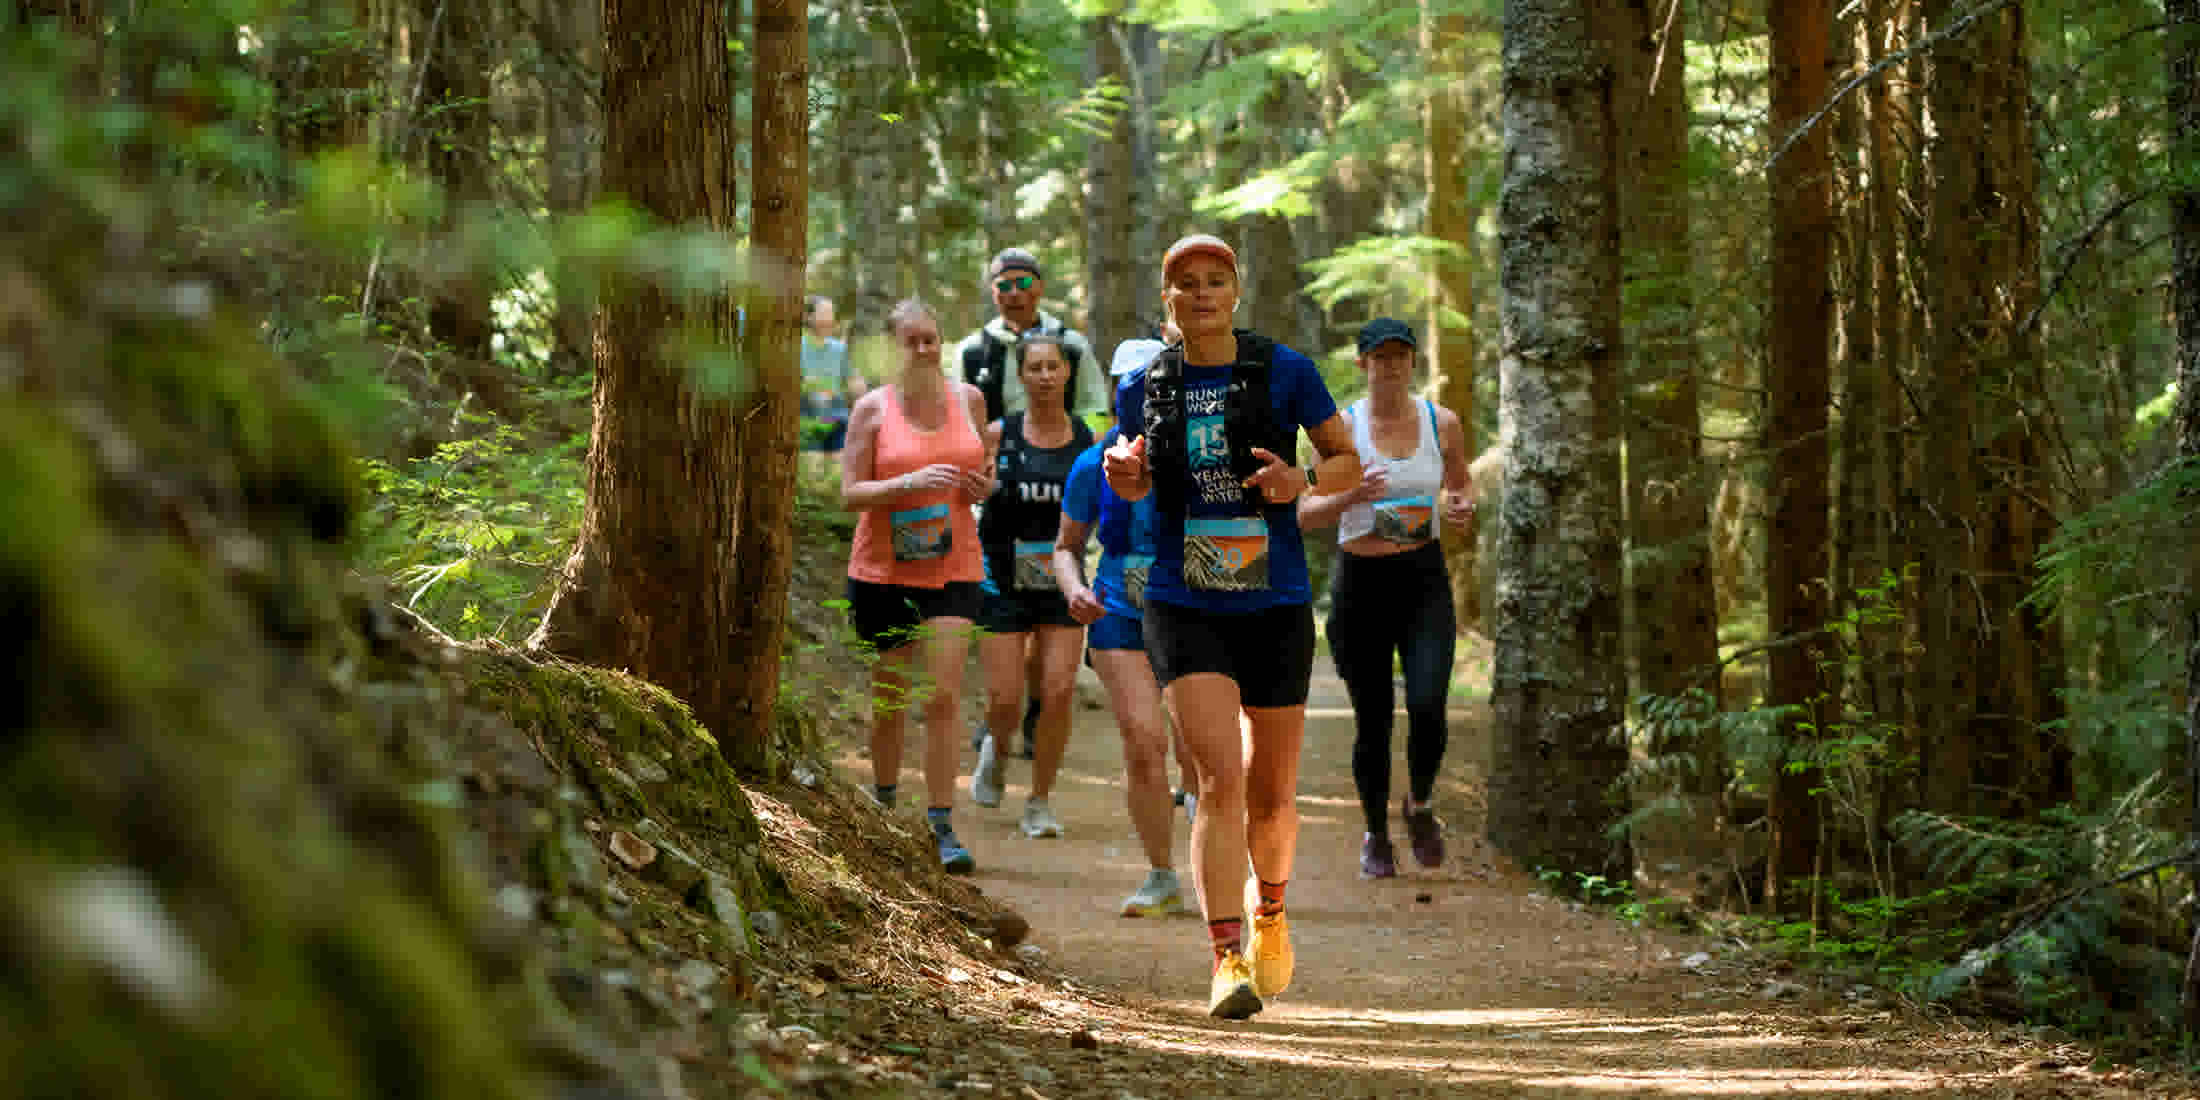 Runners in the forest during Whistler Half Marathon